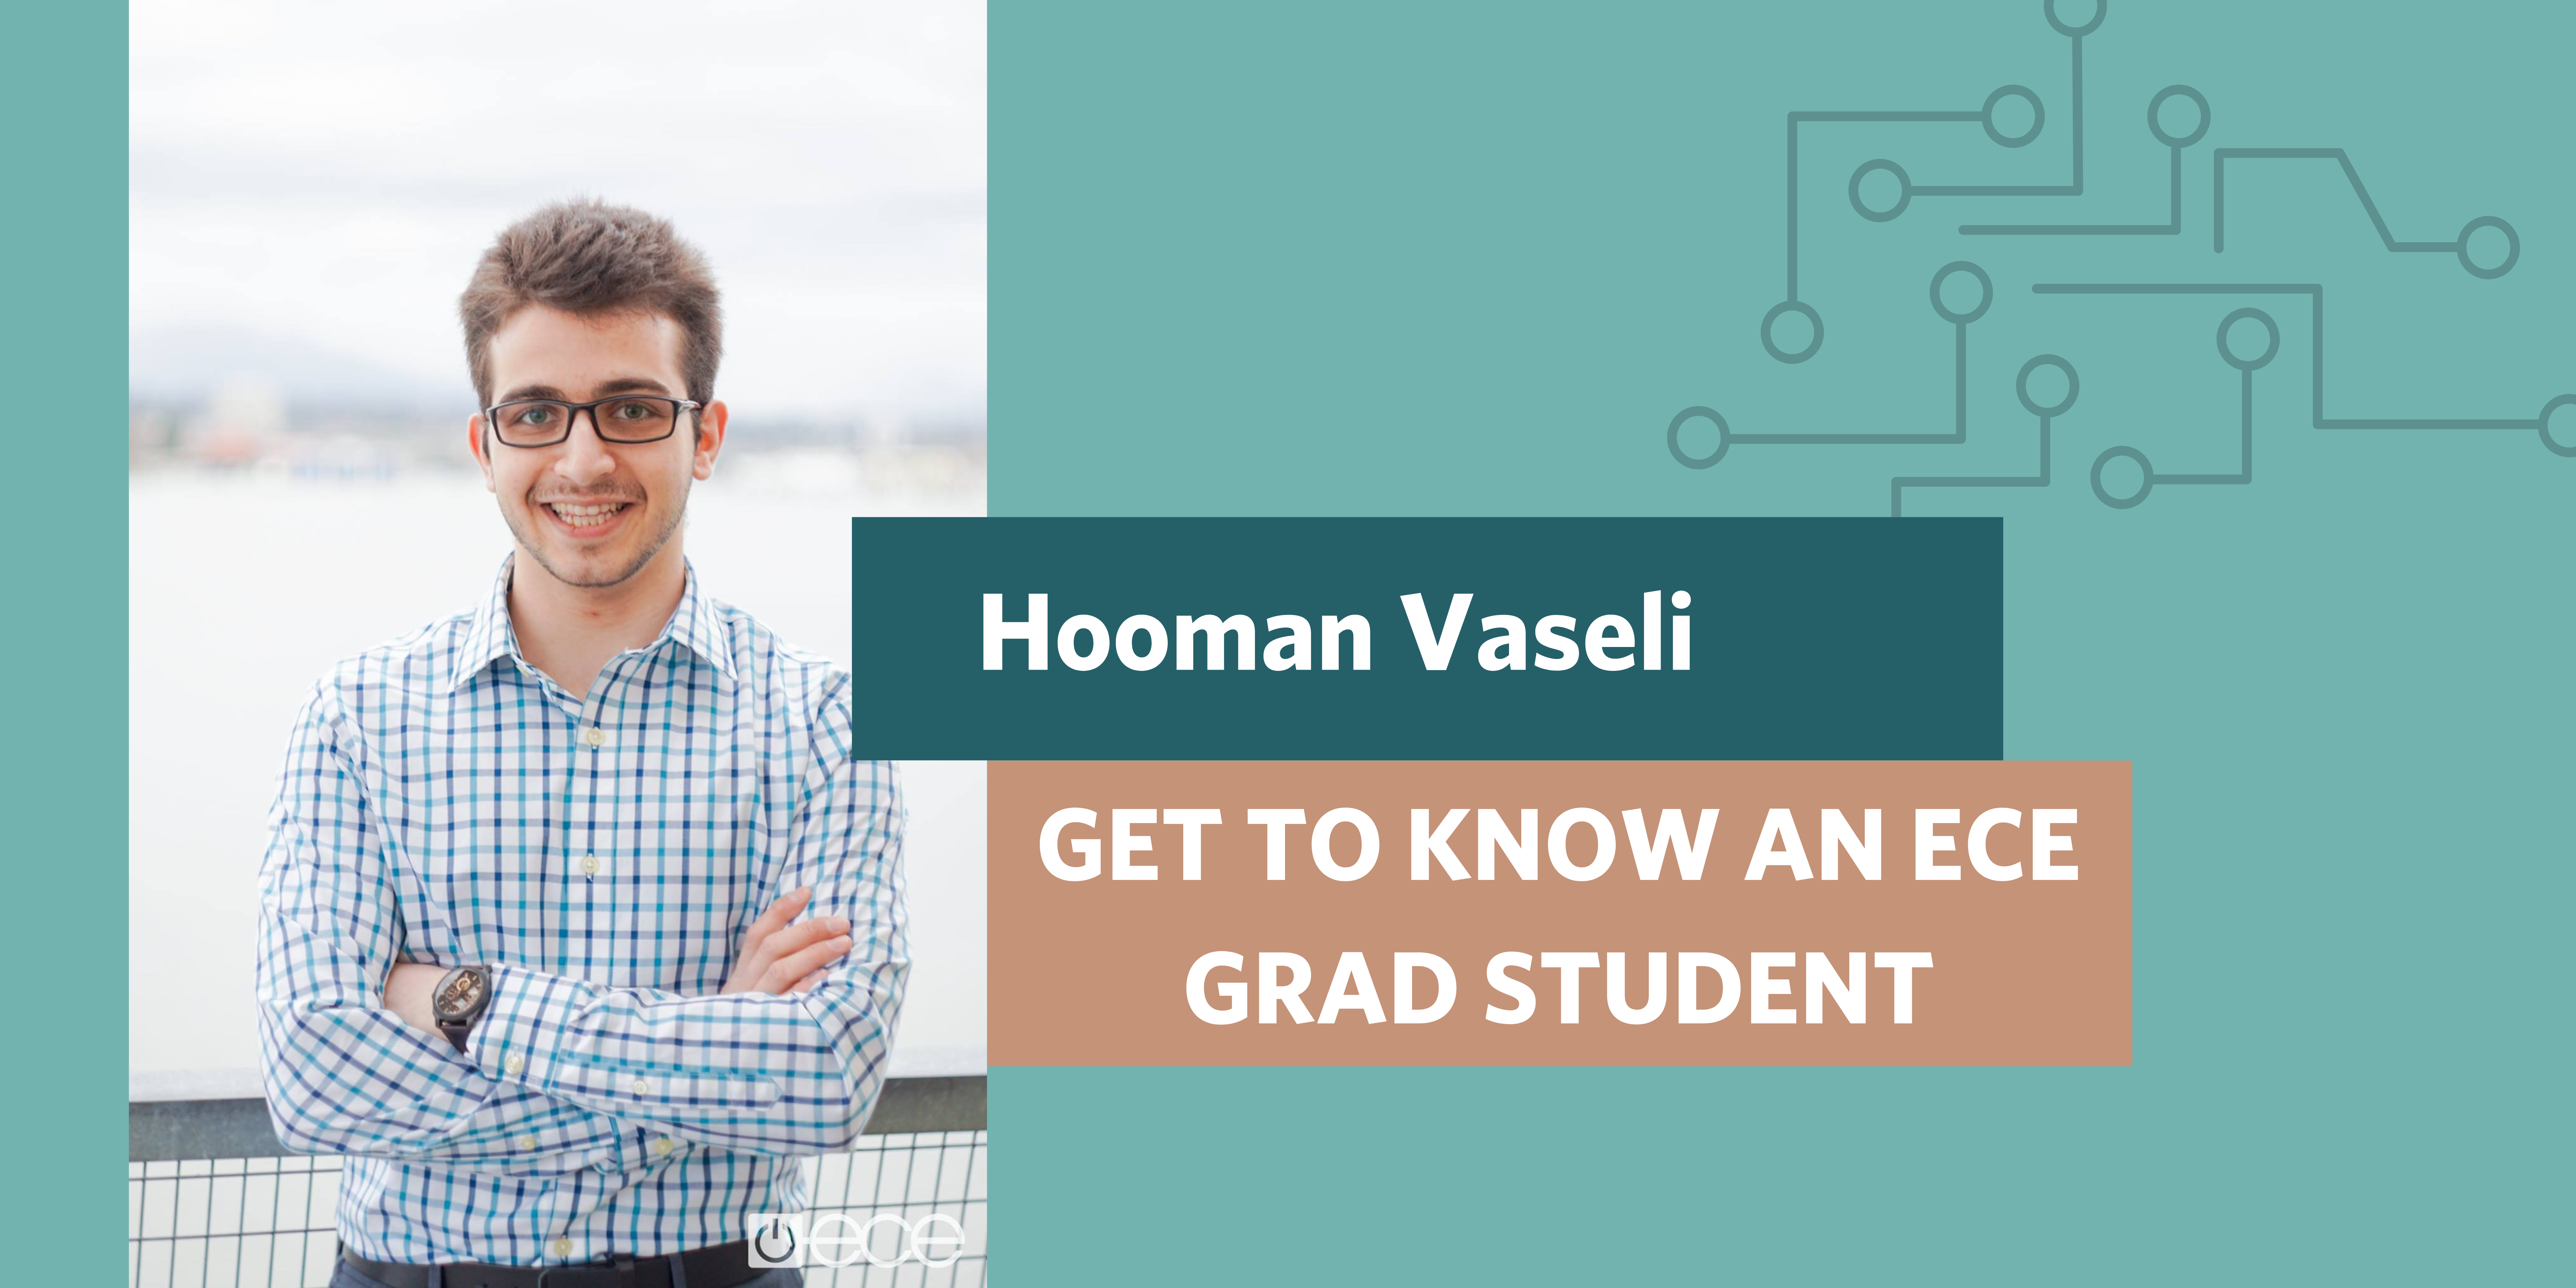 Get to Know an ECE Grad Student